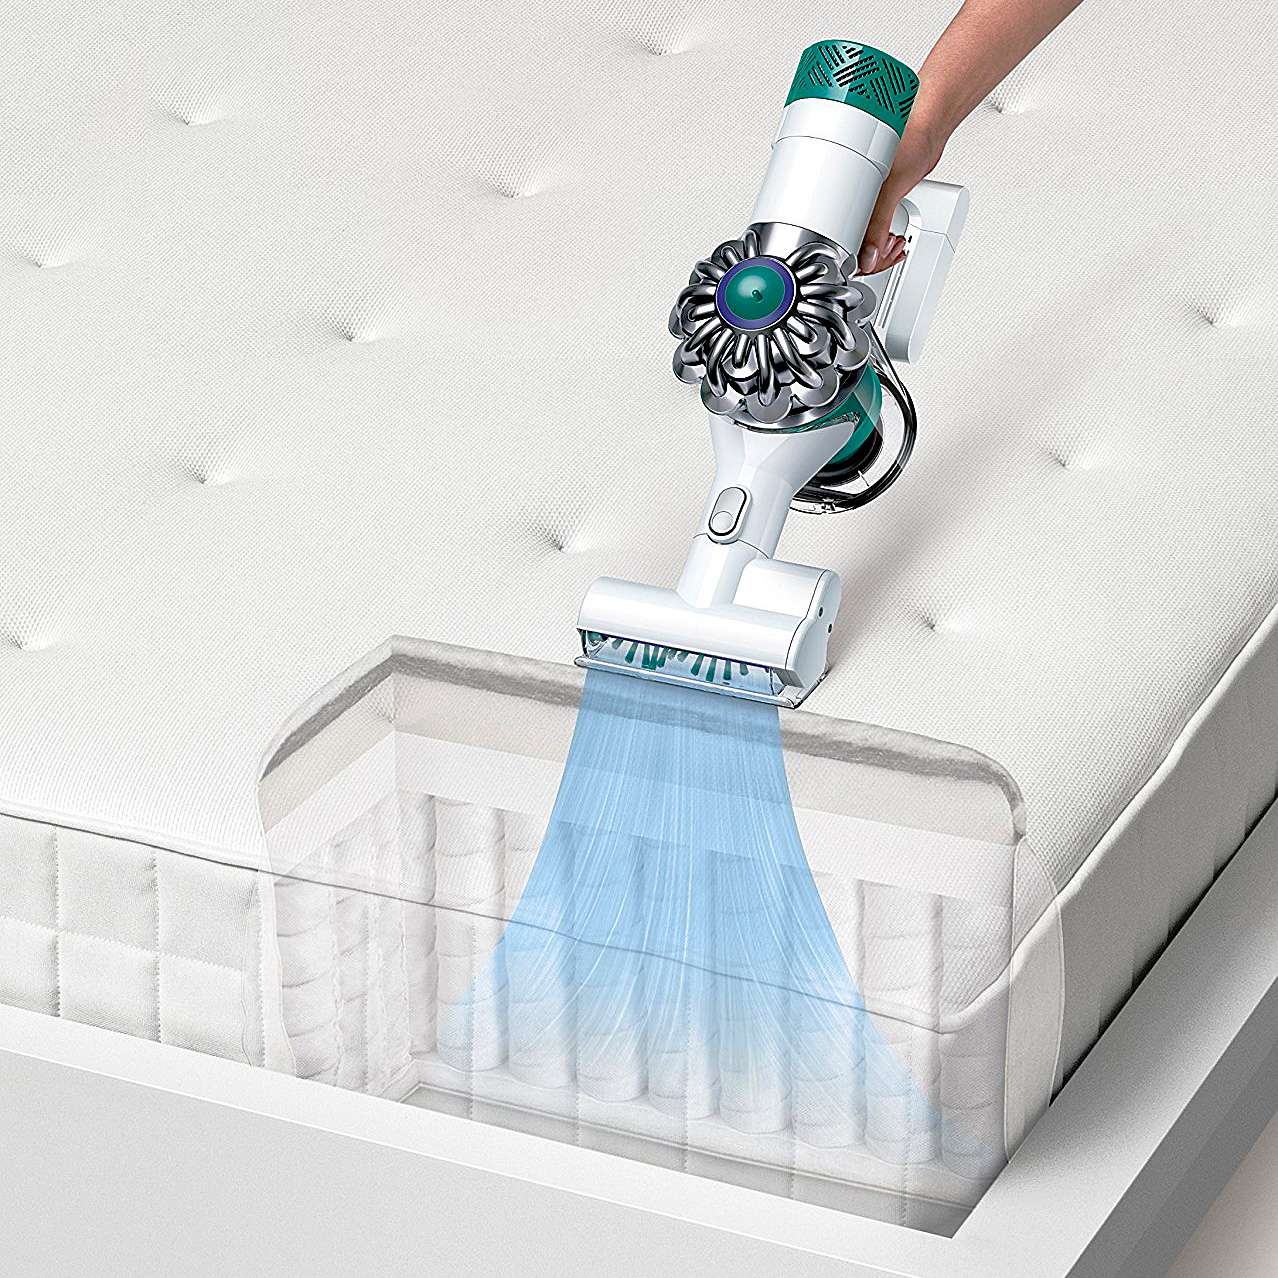 Dyson V6 Mattress HH08 VacuumThis model is discontinued and no longer